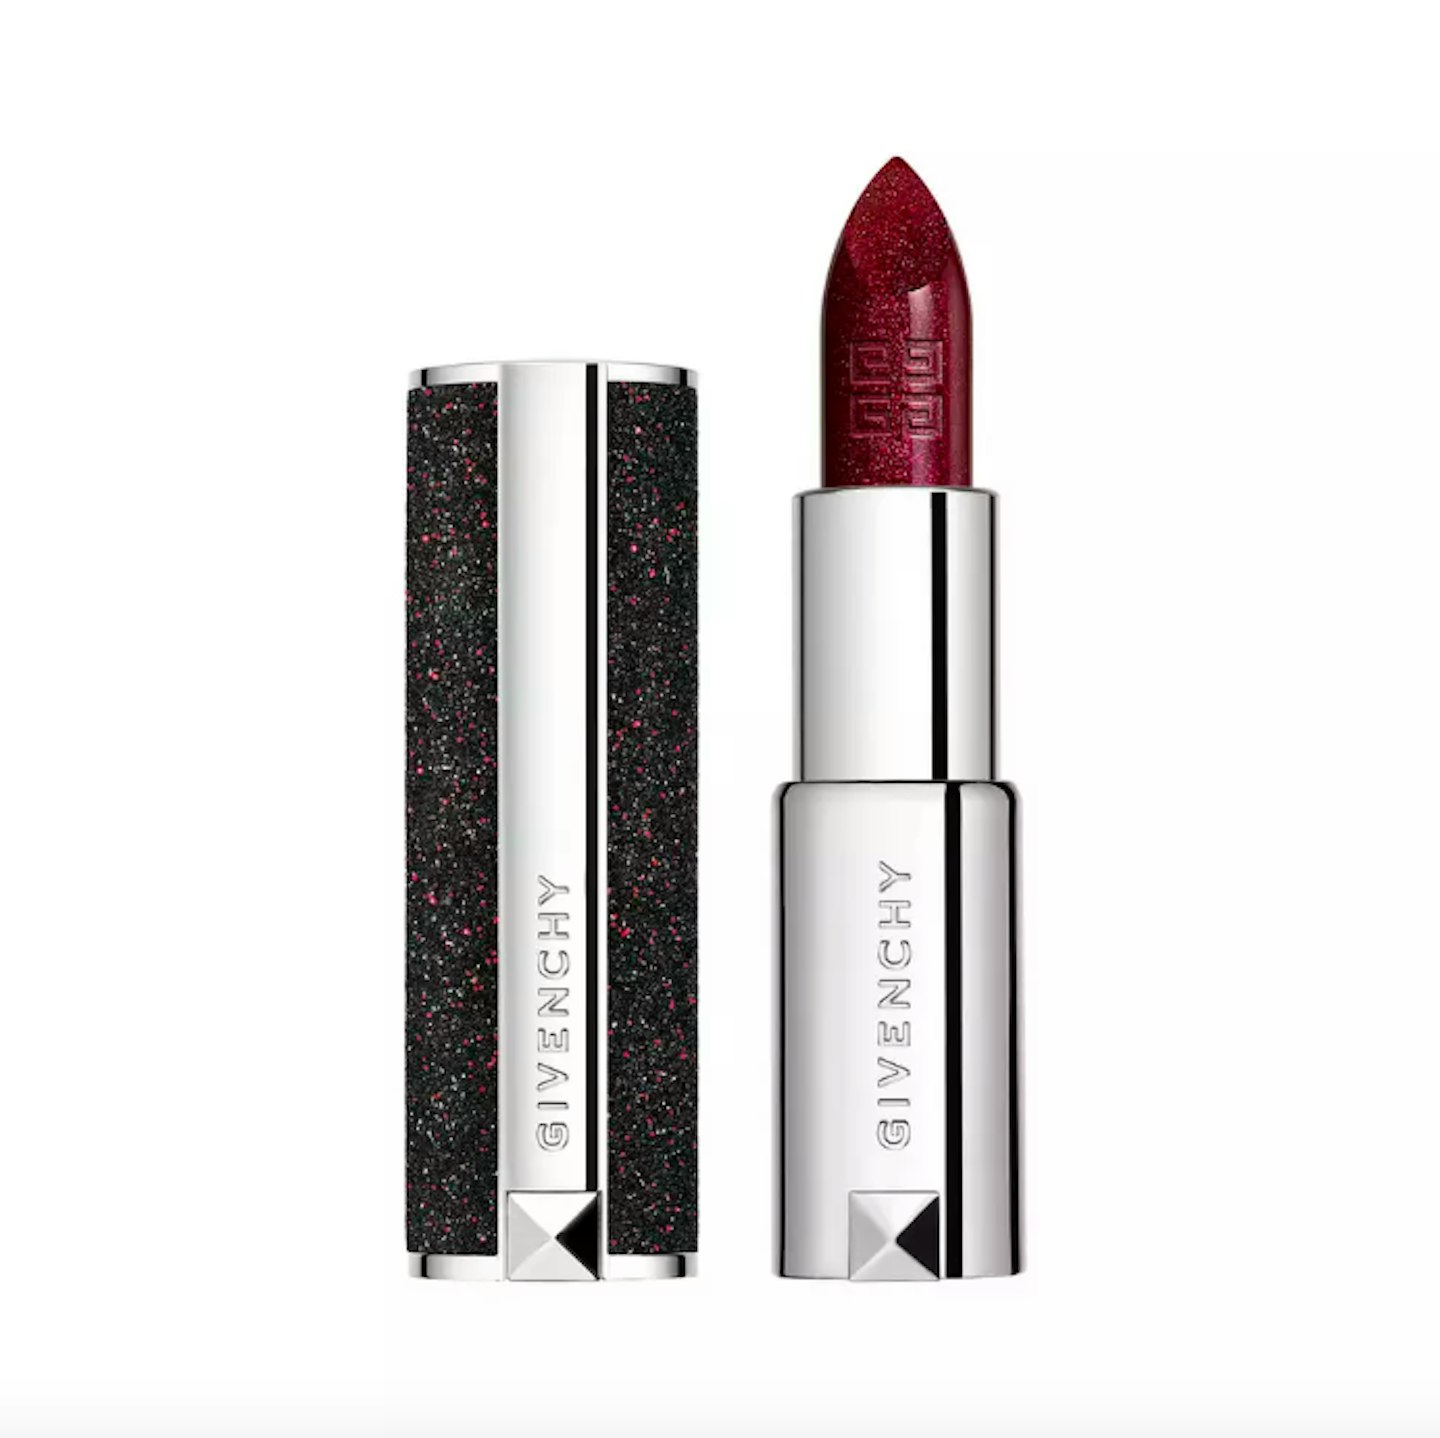 Givenchy Le Rouge Night Noir In Night In Red, £29